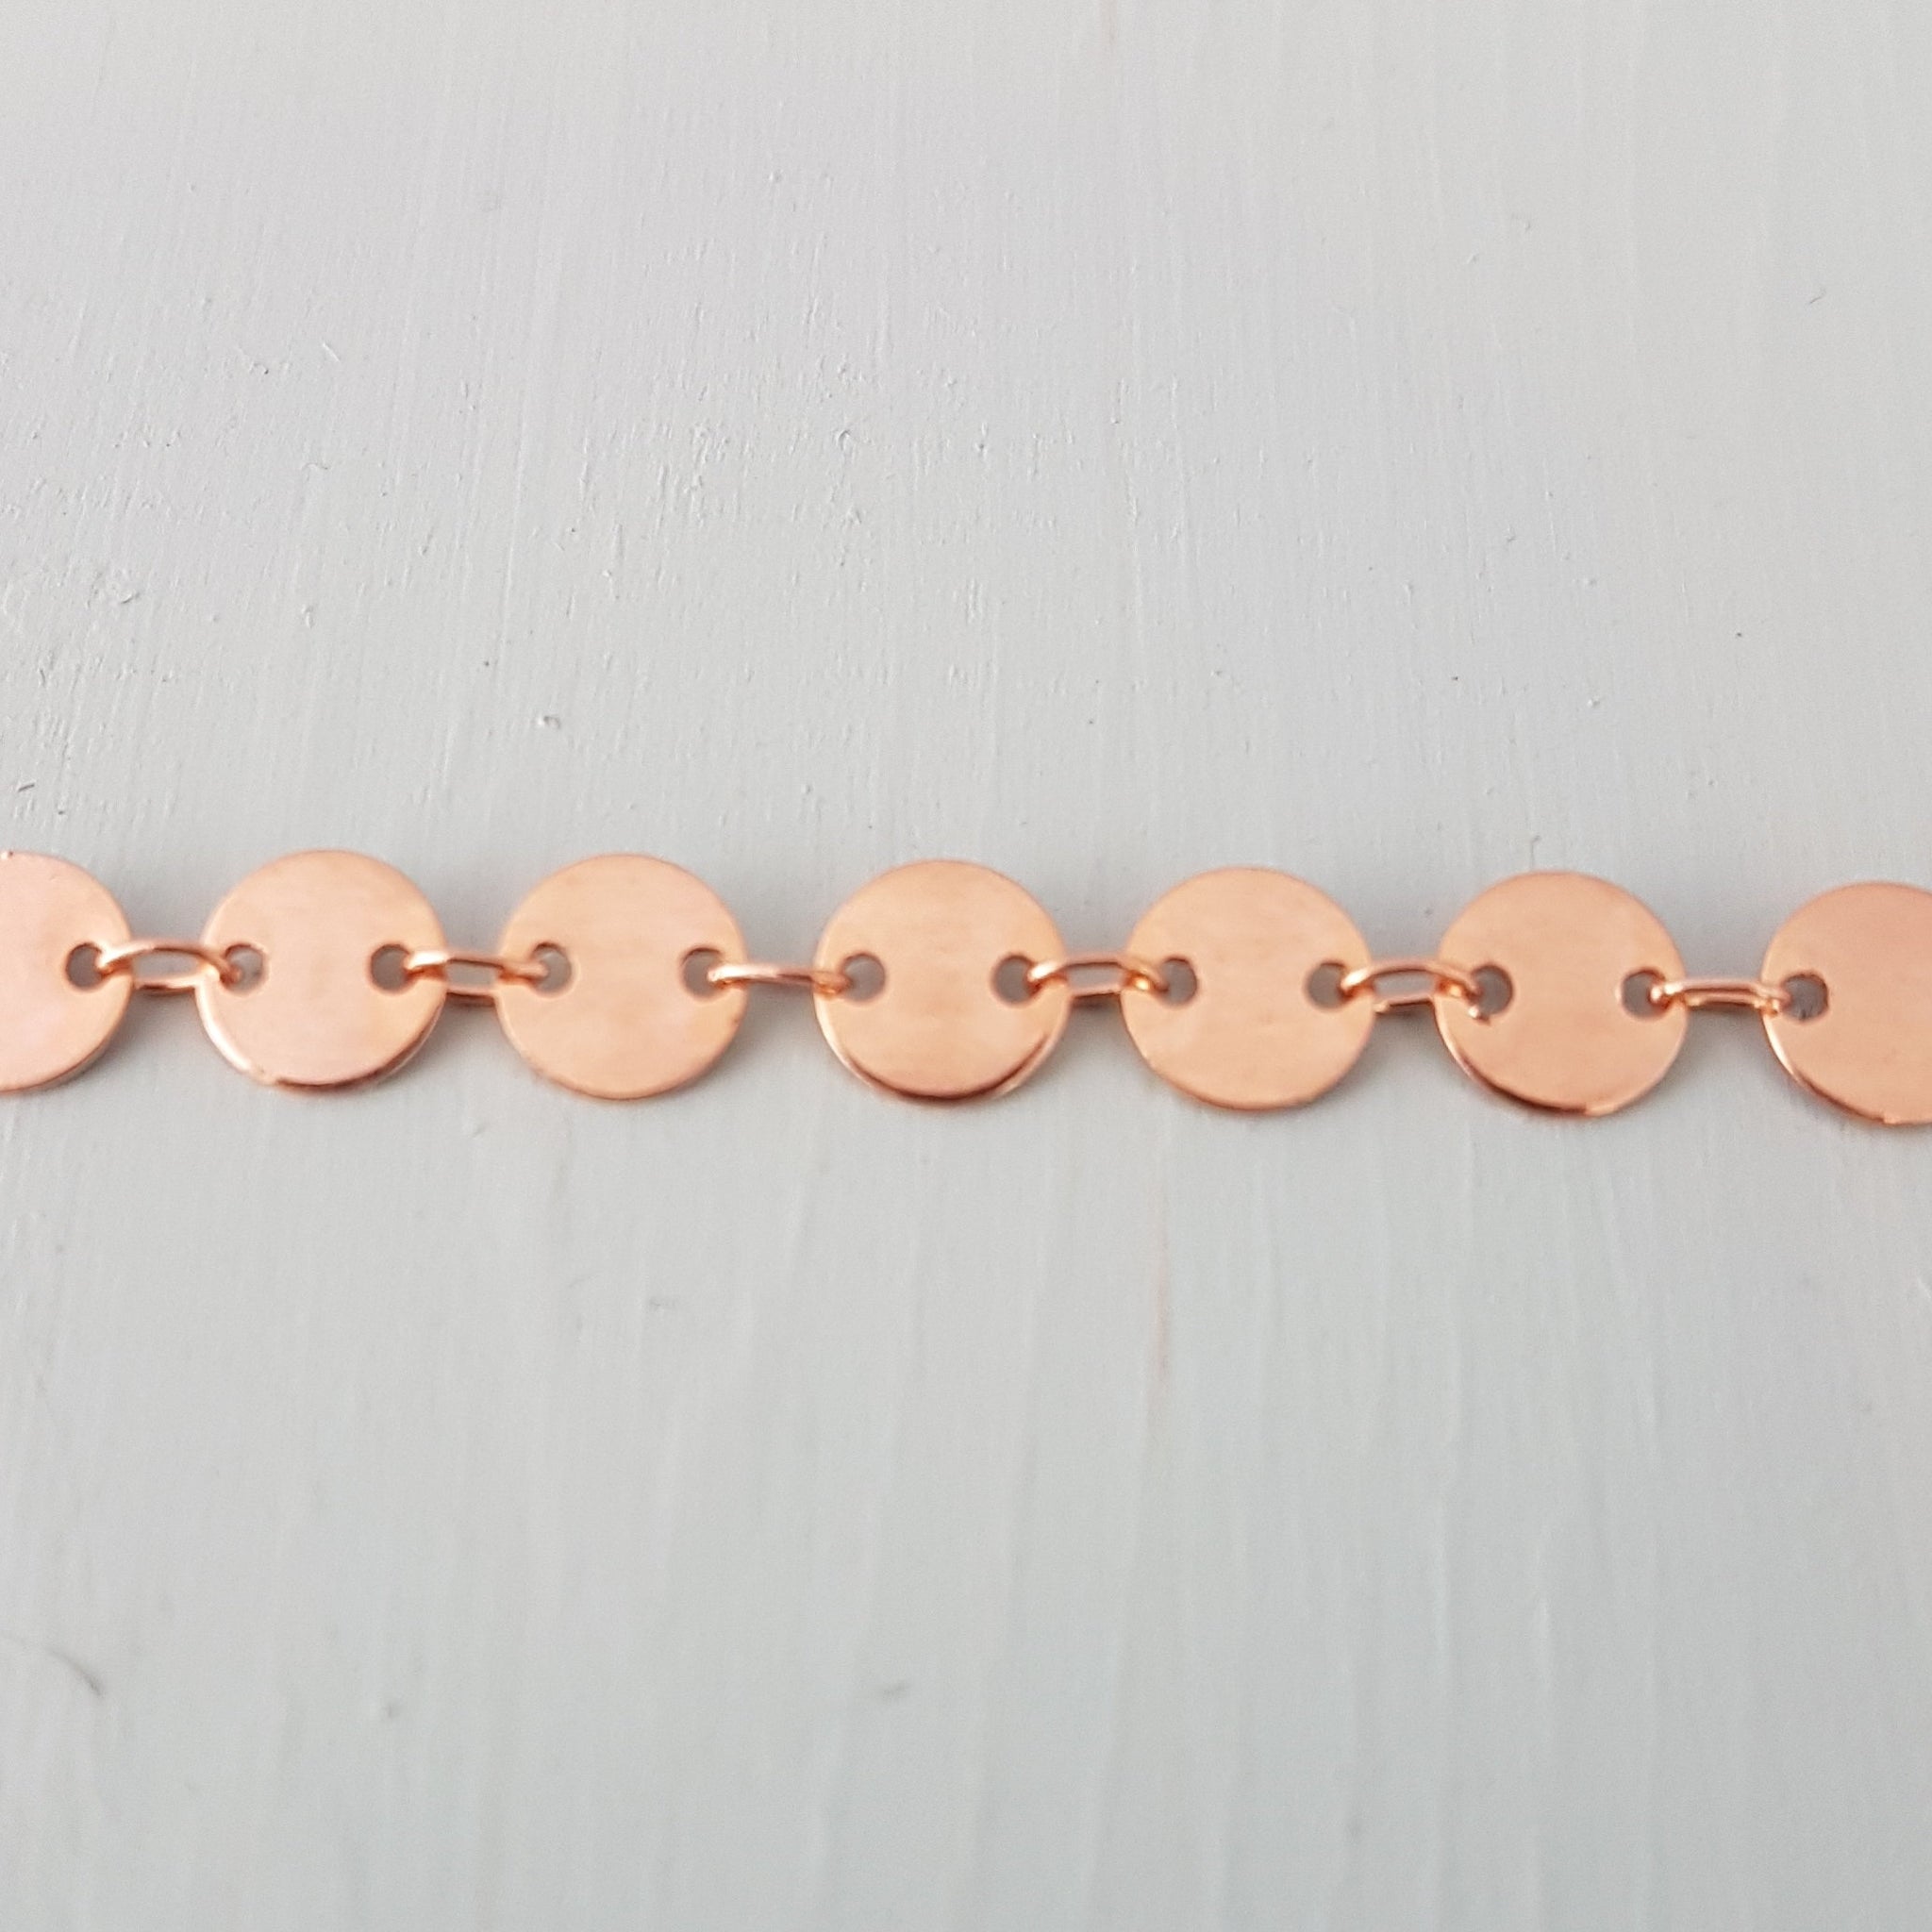 Rose Gold Coin Choker Custom Necklace Rose Gold Small Circle Choker Chain Layering Necklace in Rosegold Disc Chain Boho Jewelry Beach - Gwen Delicious Jewelry Designs